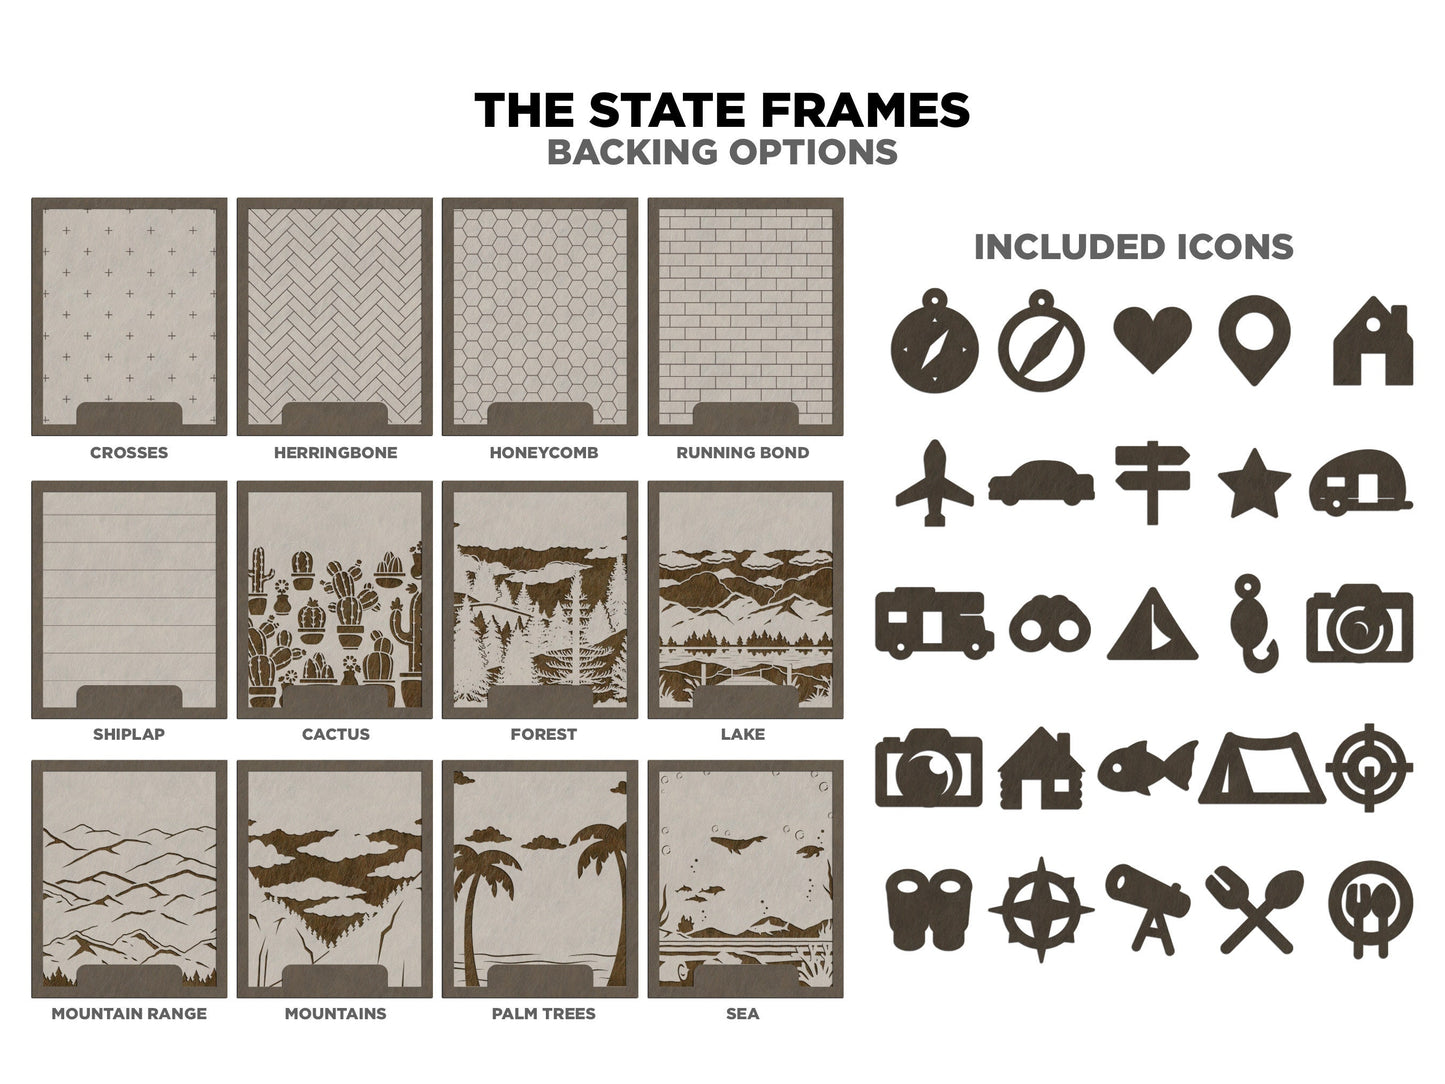 The Pennsylvania State Frame - 13 text options, 12 backgrounds, 25 icons Included - Make over 7,500 designs - Glowforge & Lightburn Tested